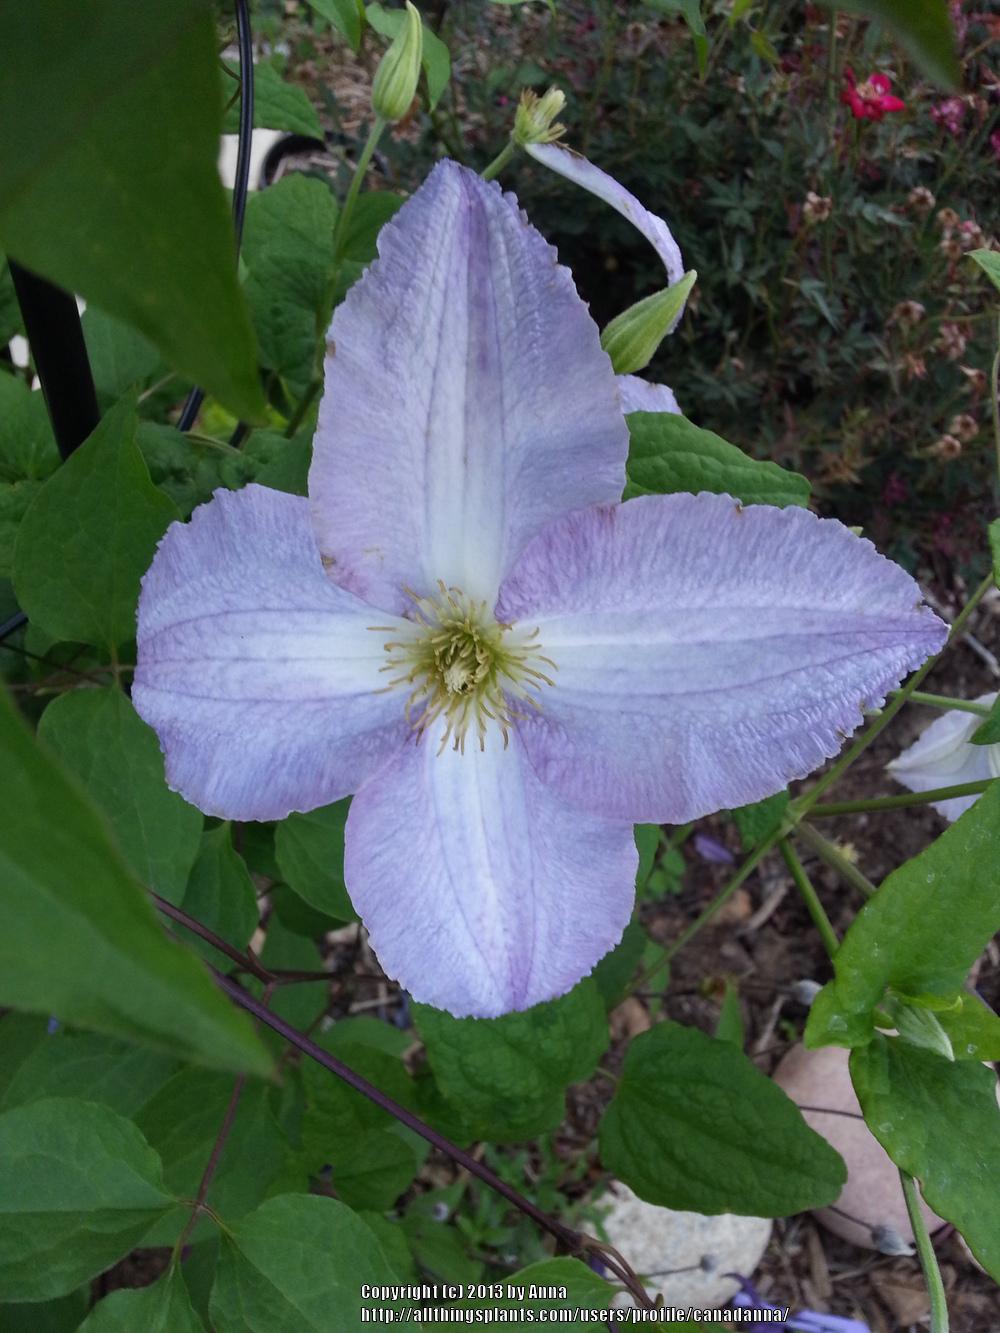 Photo of Clematis 'Dominika' uploaded by canadanna